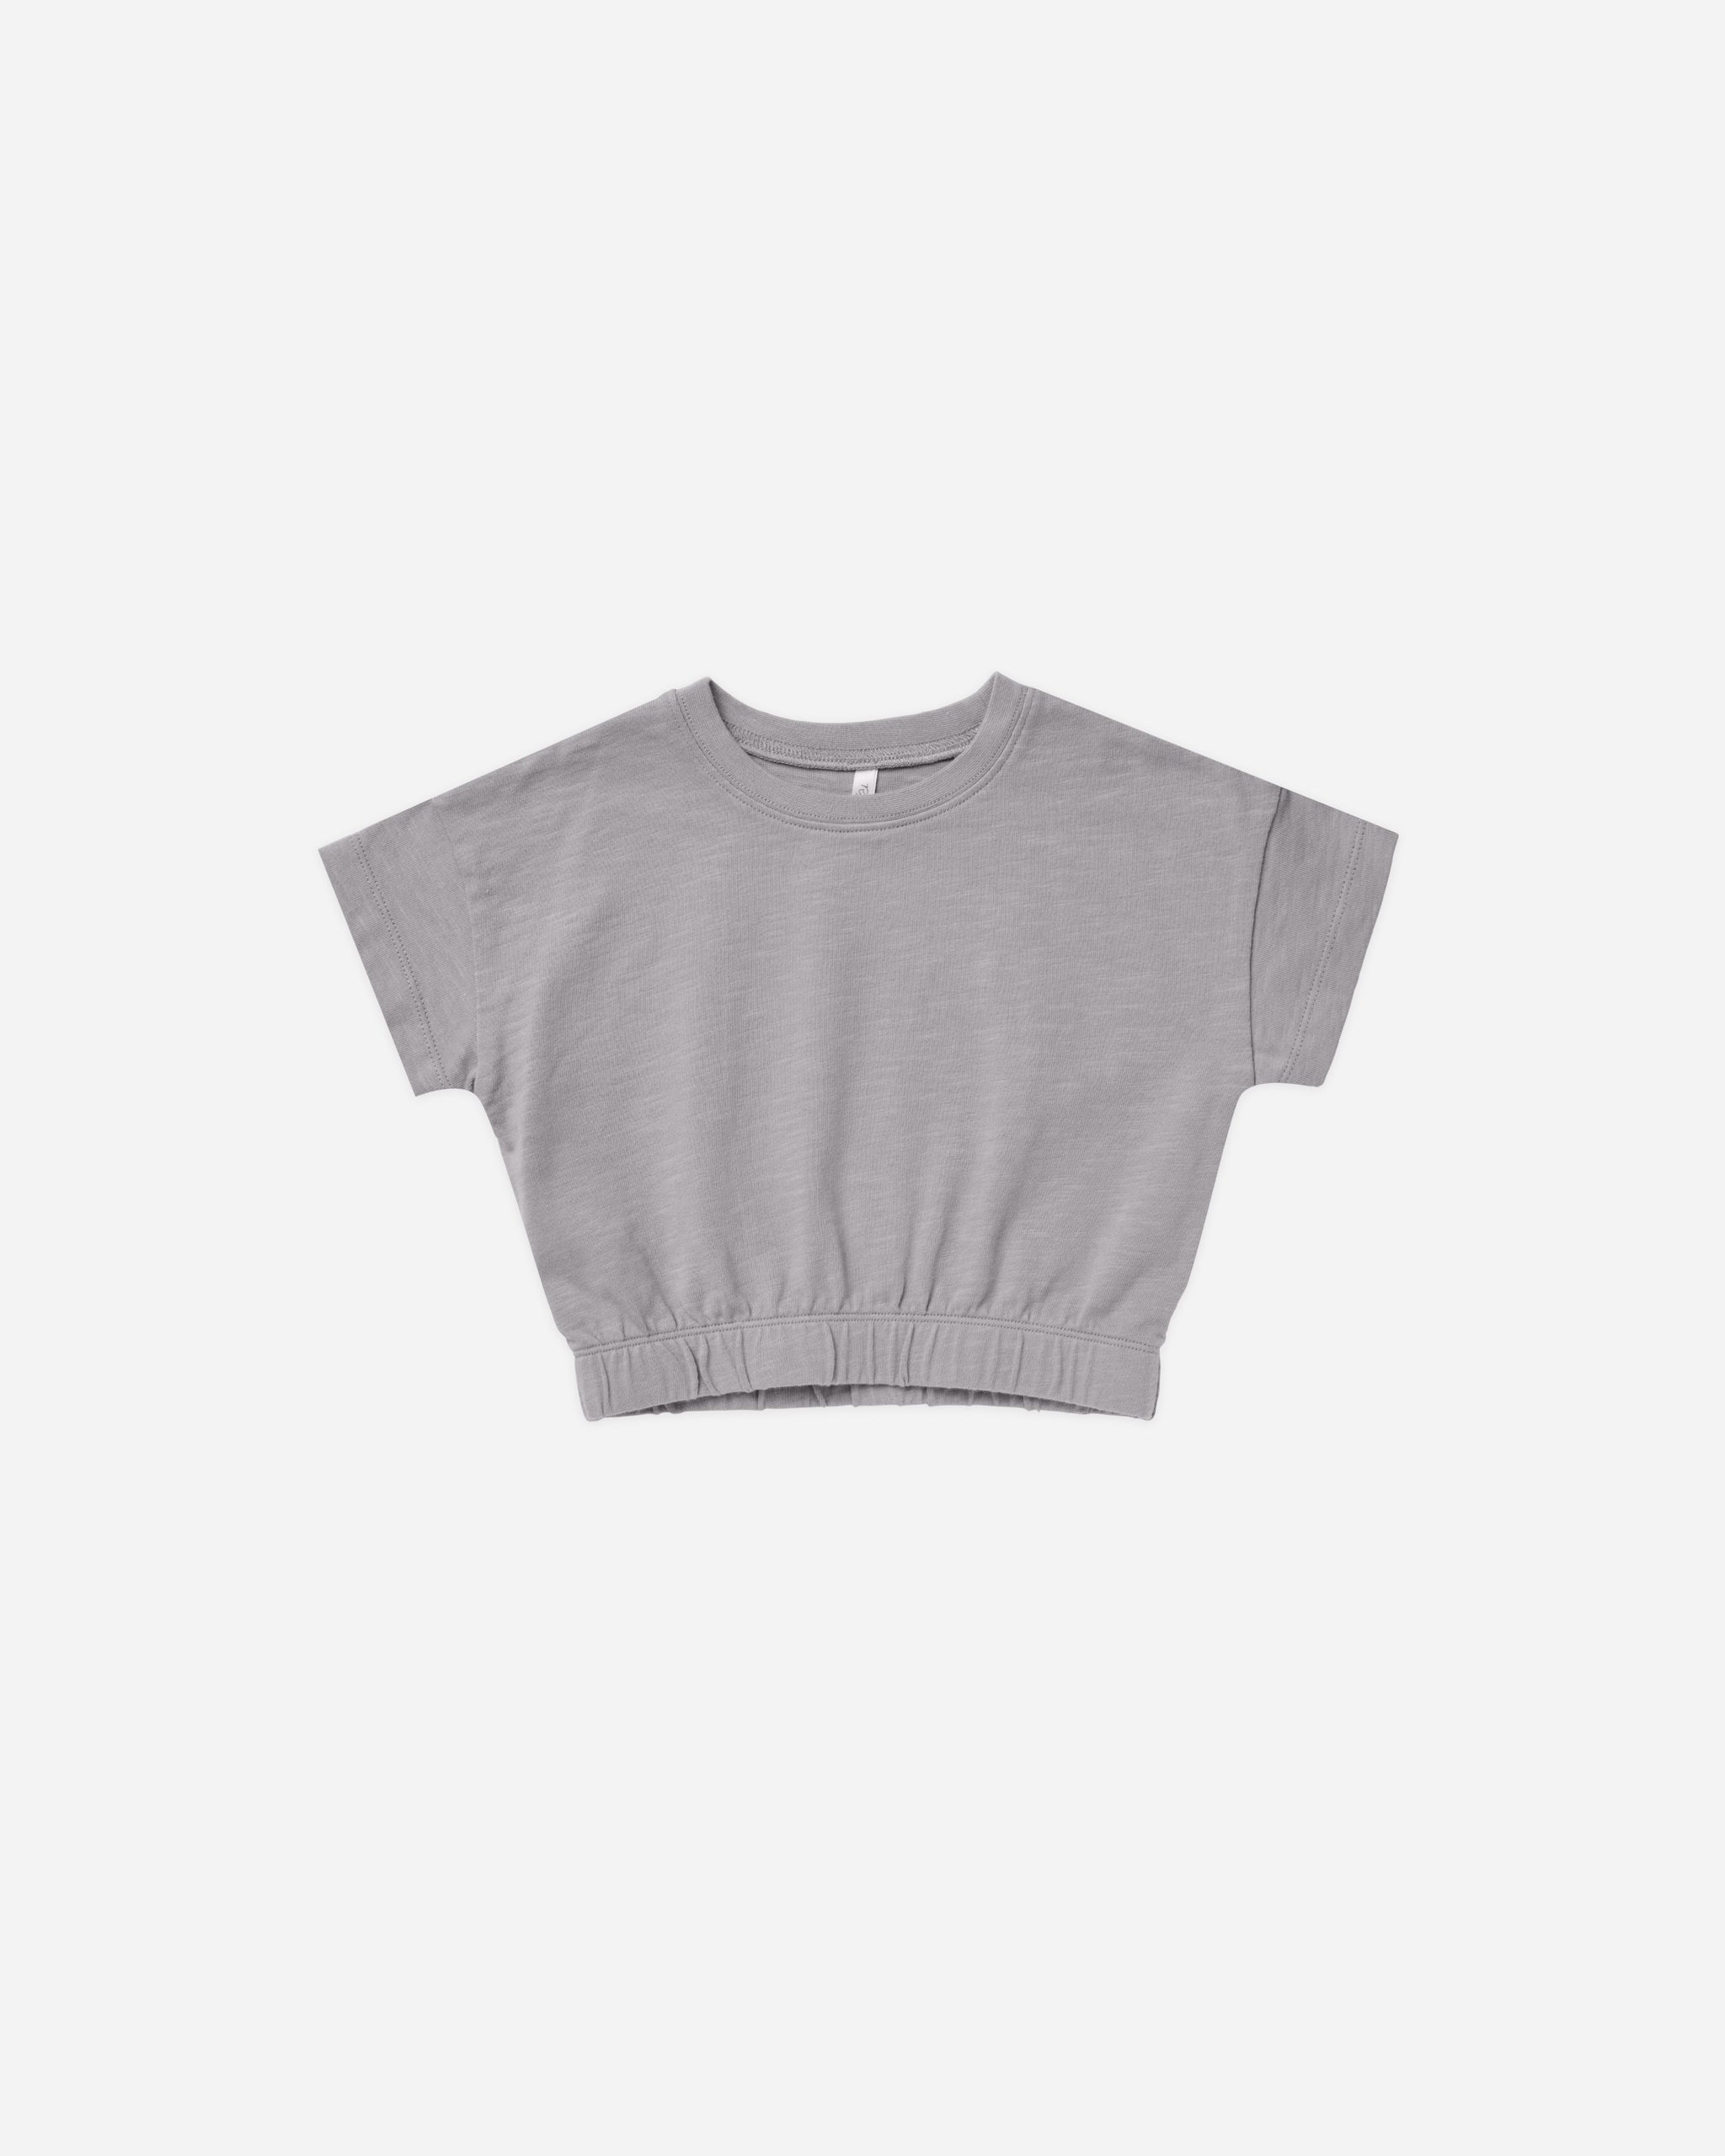 Cinched Jersey Tee || French Blue - Rylee + Cru | Kids Clothes | Trendy Baby Clothes | Modern Infant Outfits |